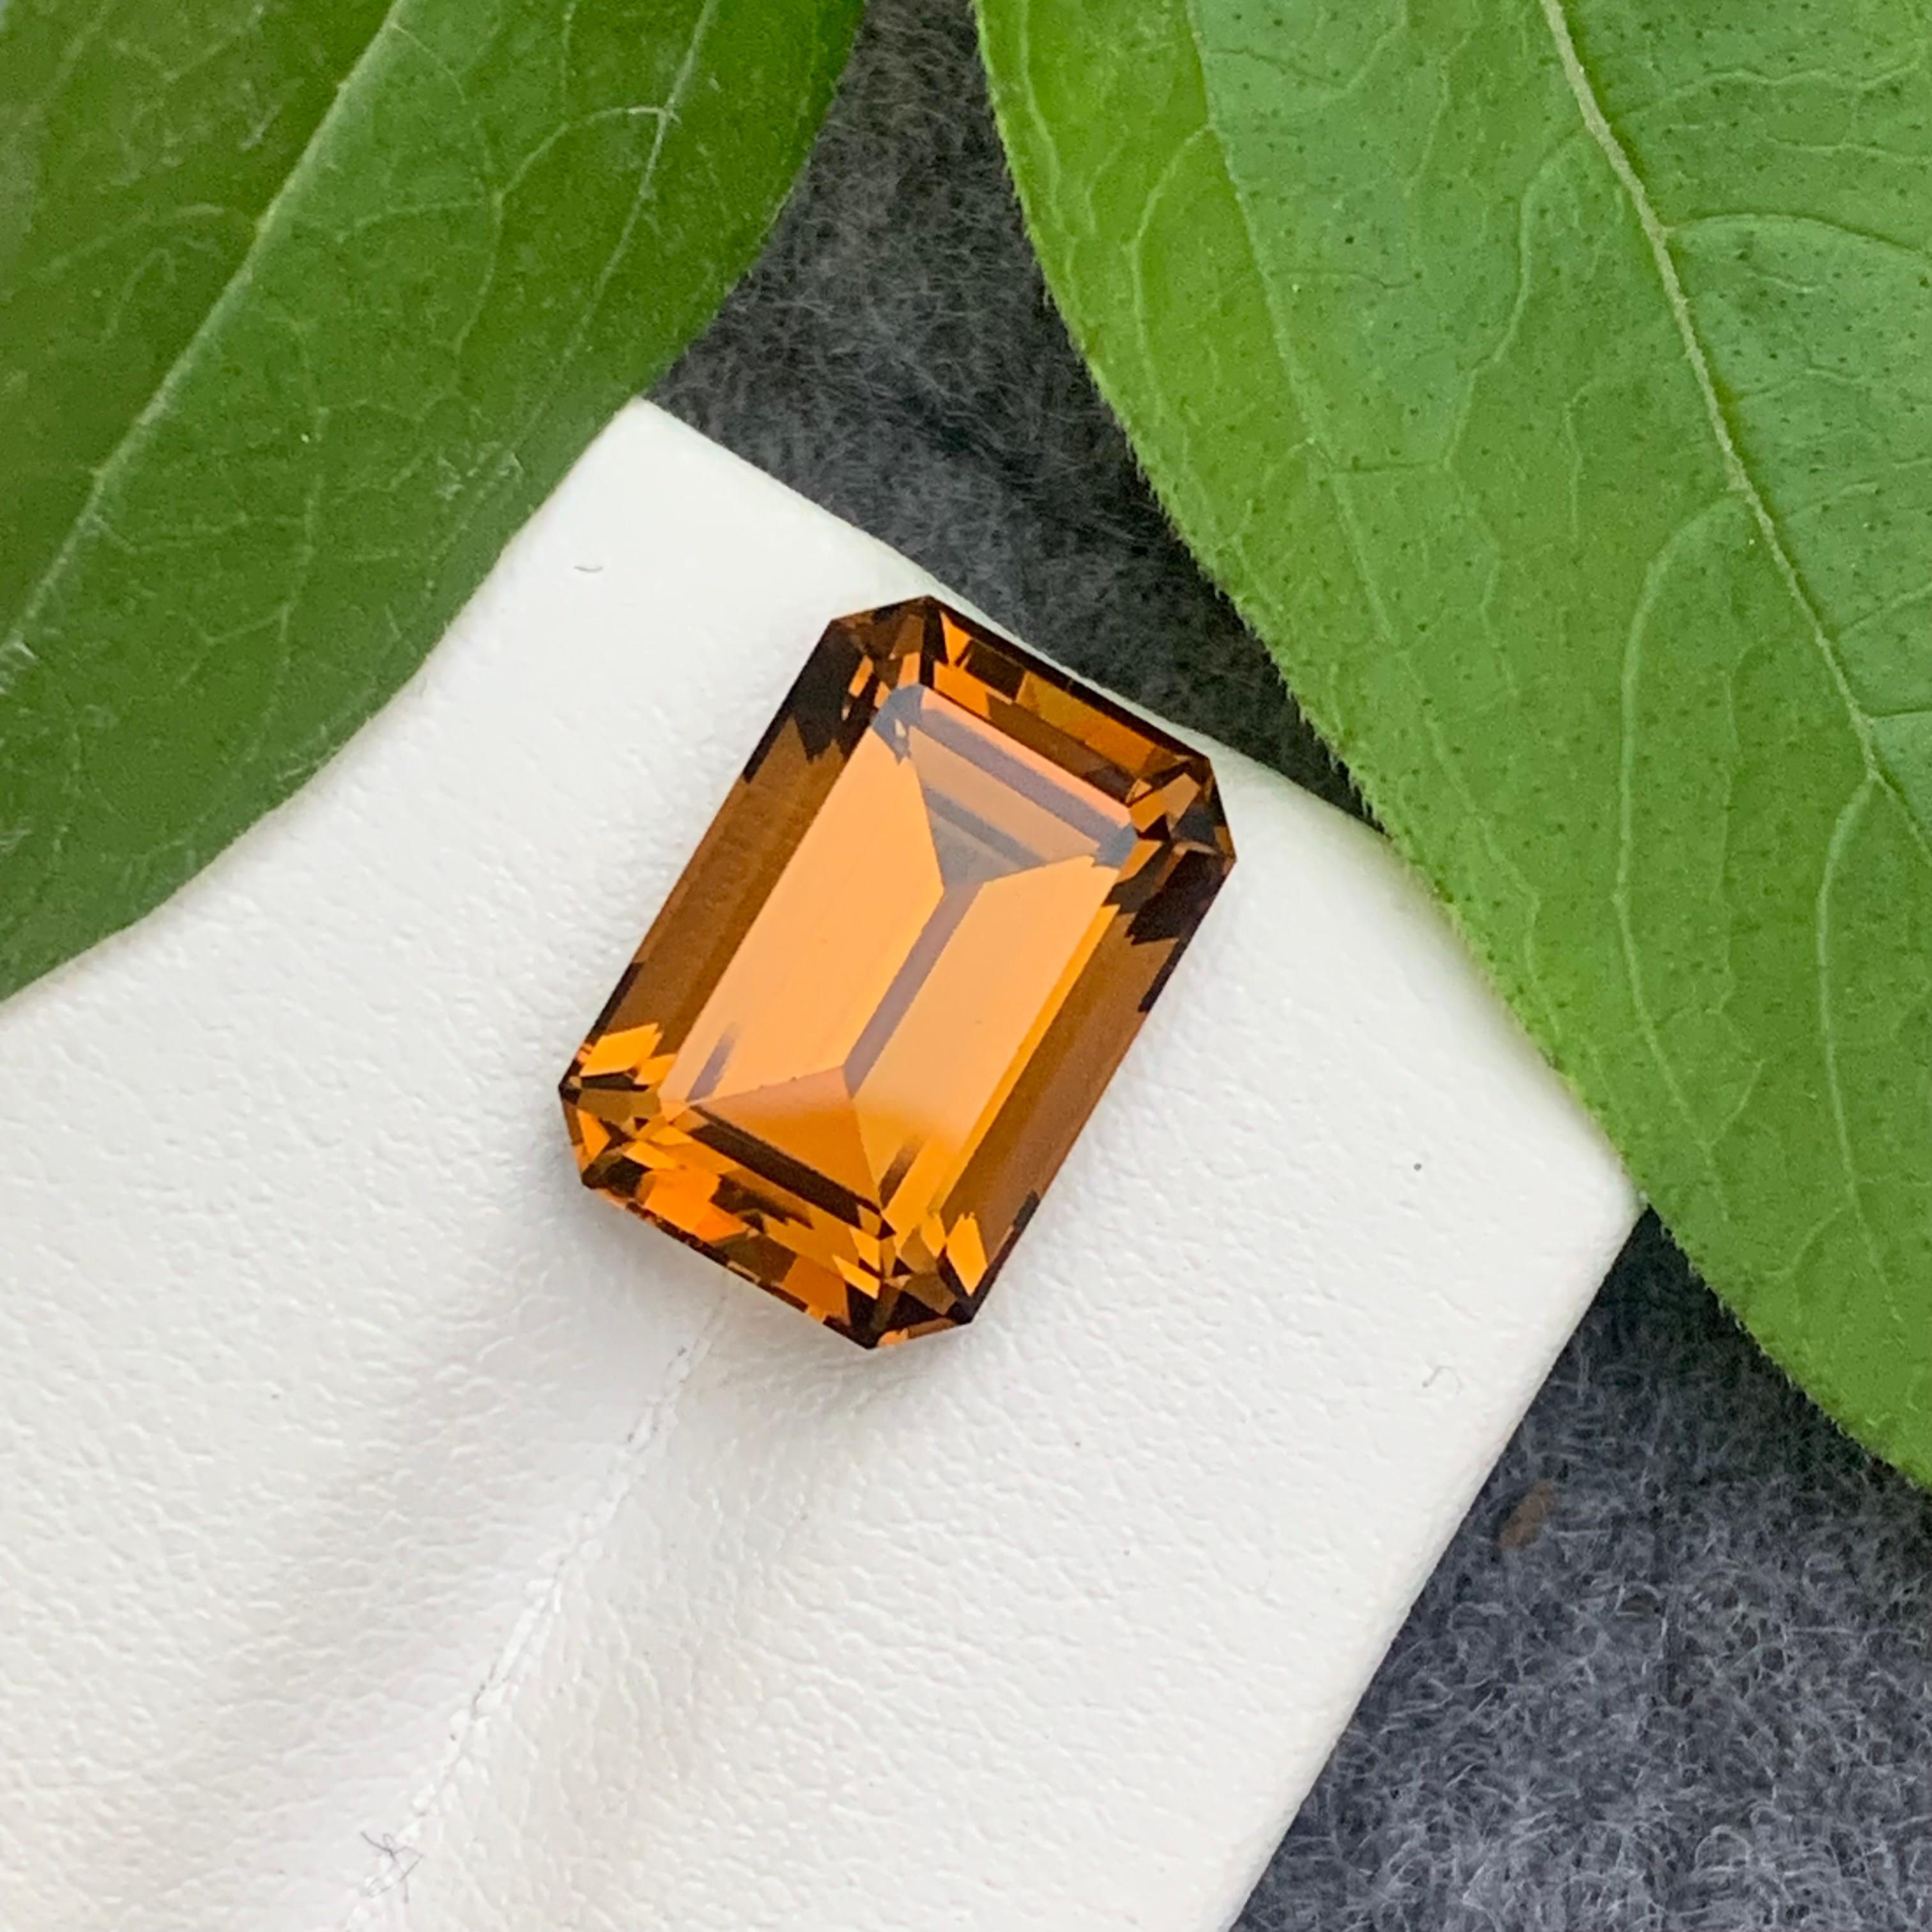 Faceted Honey Citrine
Weight : 8.55 Carats
Dimensions : 14.5x10.1x8.4 Mm
Clarity : Loupe Clean 
Origin : Brazil
Color: Brown 
Shape: Emerald
Certificate: On Demand
Month: November
.
The Many Healing Properties of Citrine
Increase Optimism, And Sunny